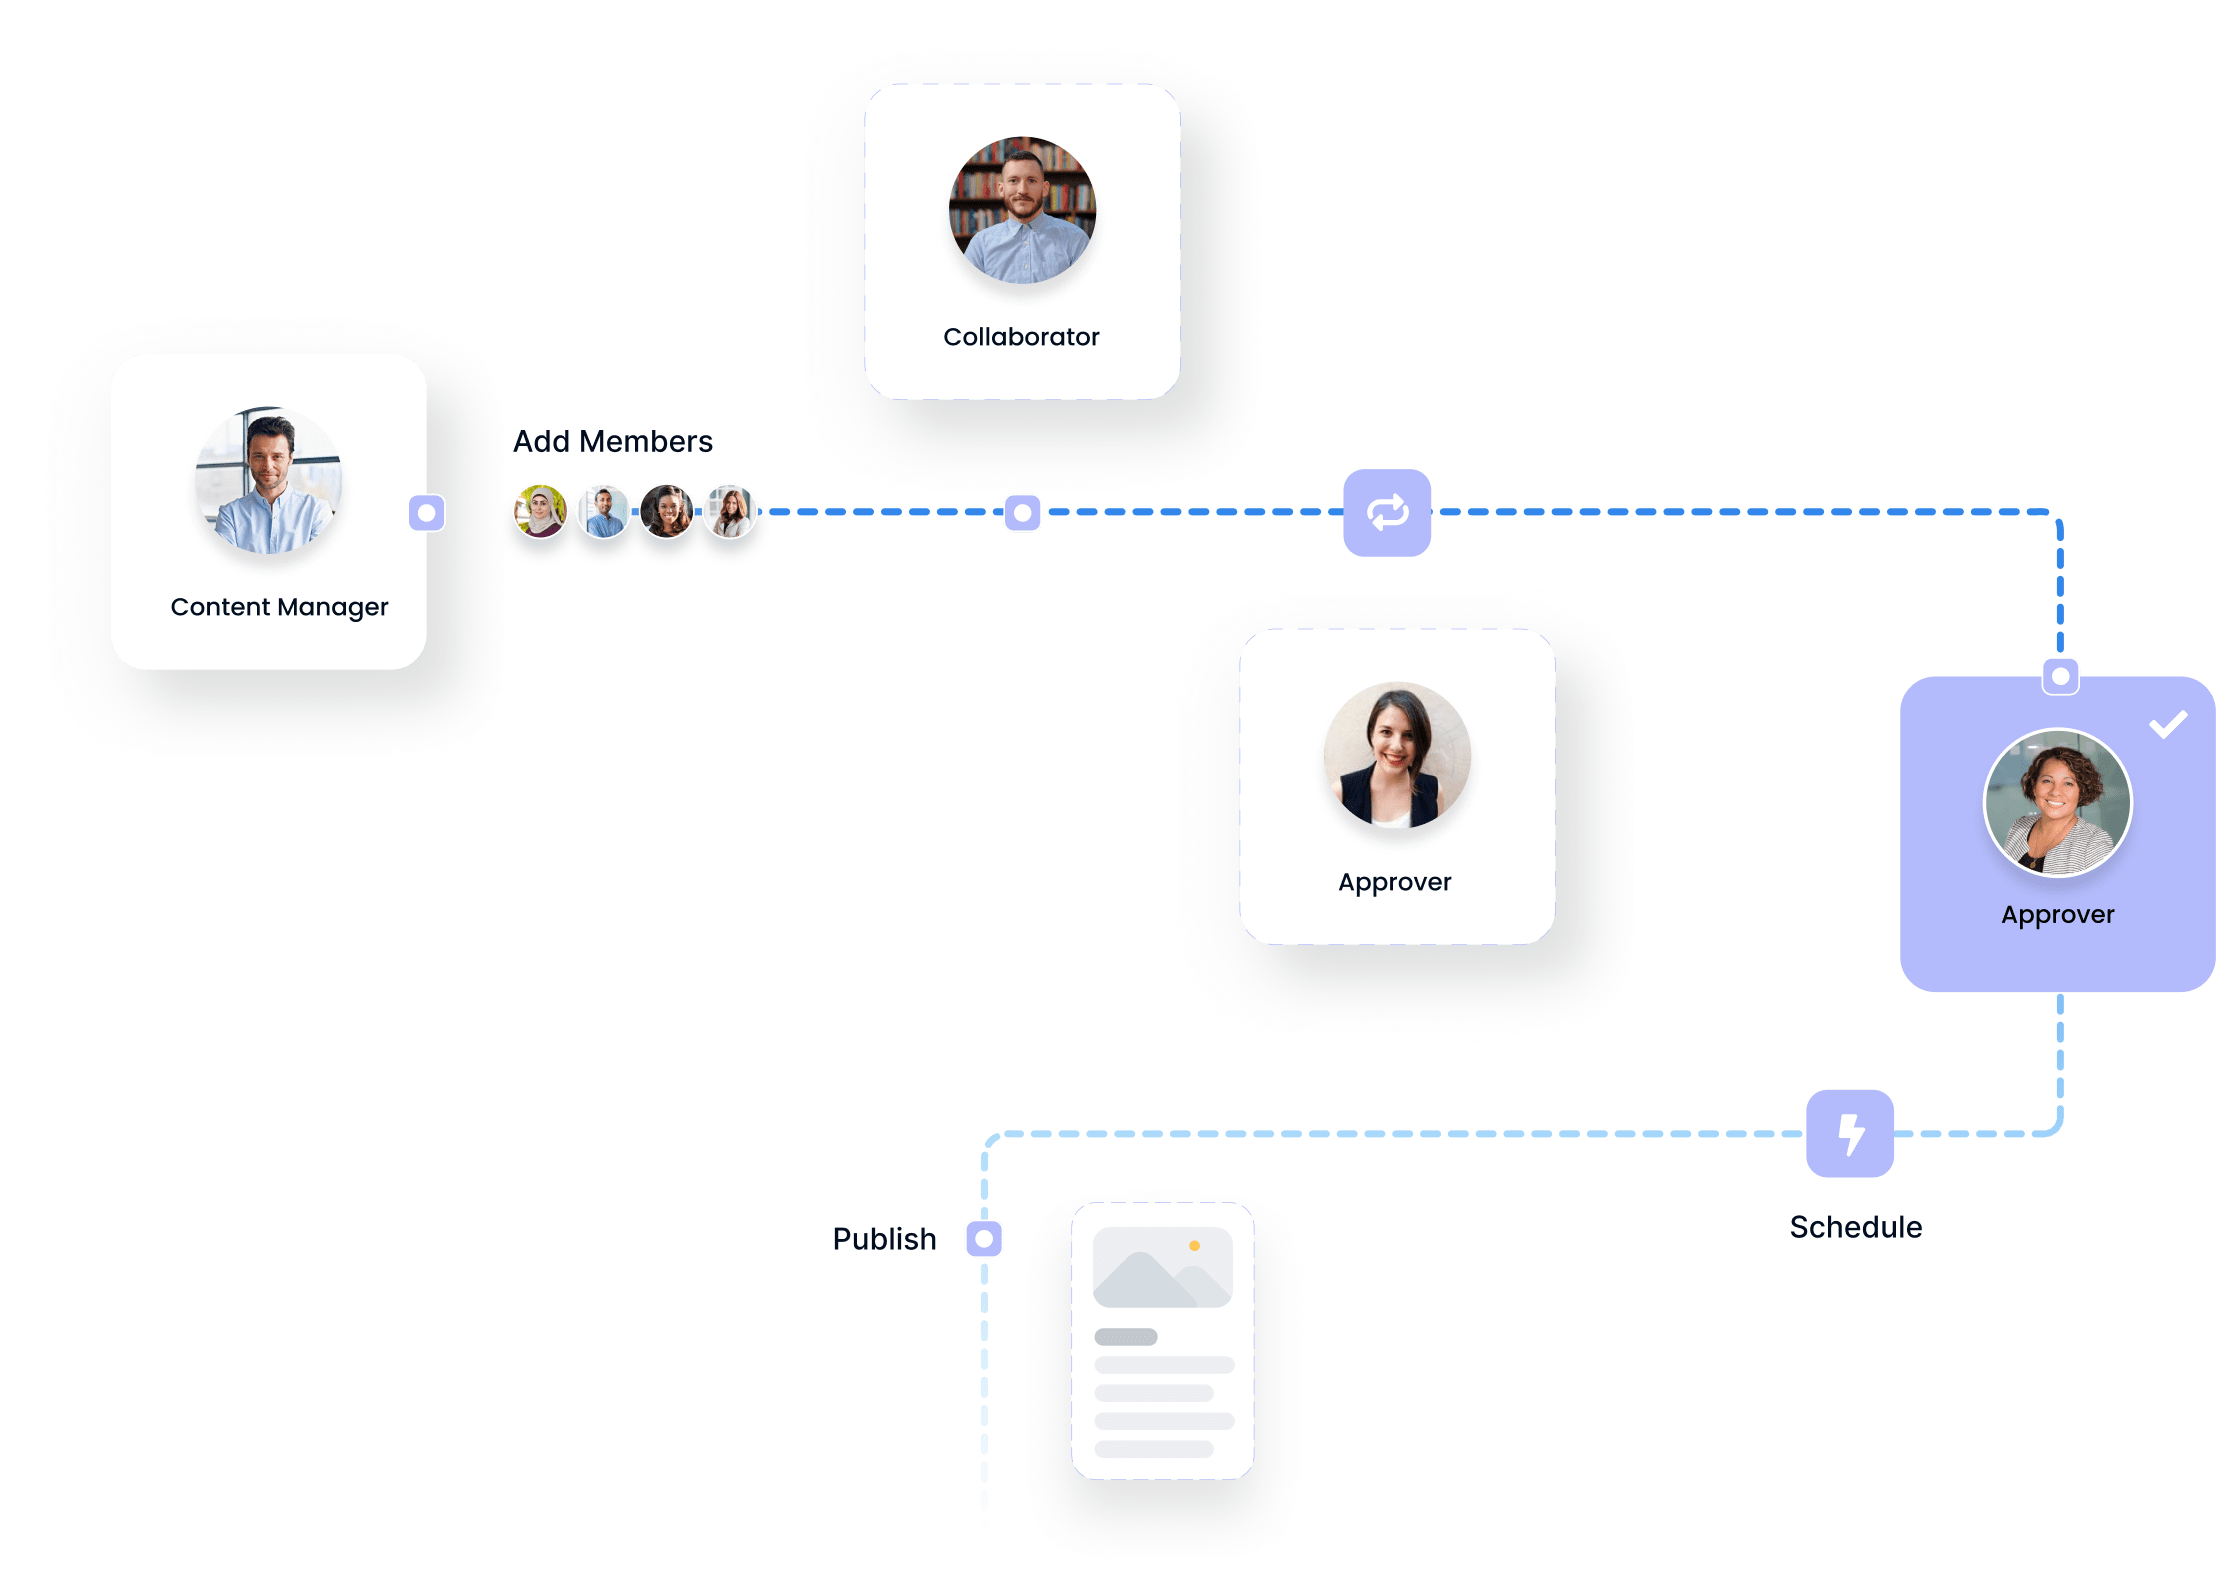 Approval workflow including clients